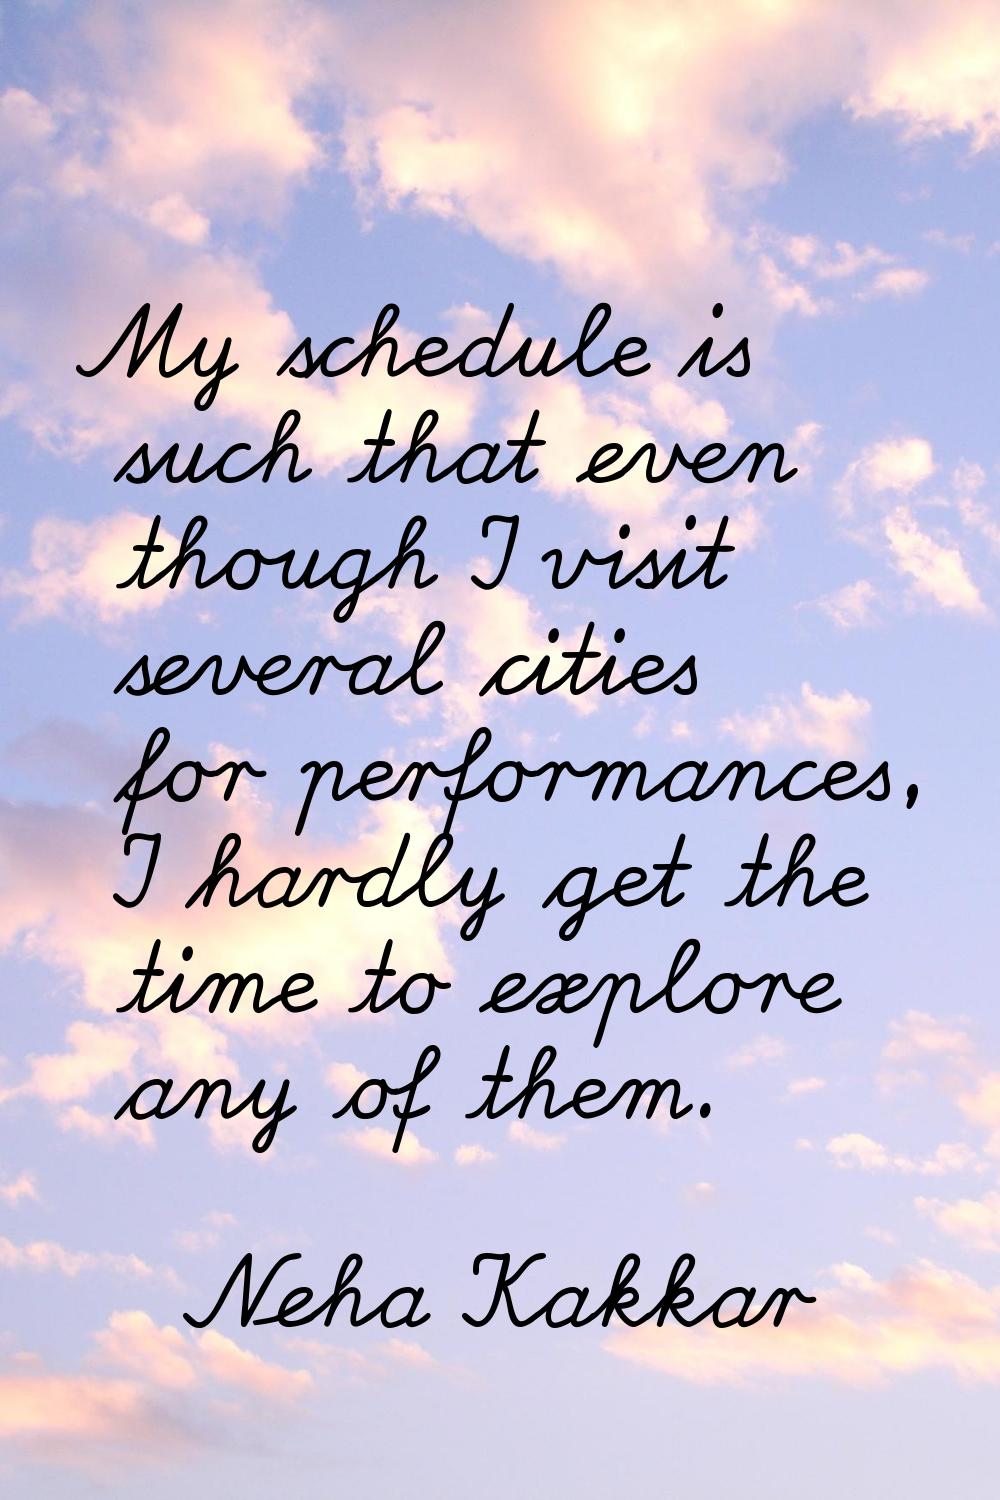 My schedule is such that even though I visit several cities for performances, I hardly get the time